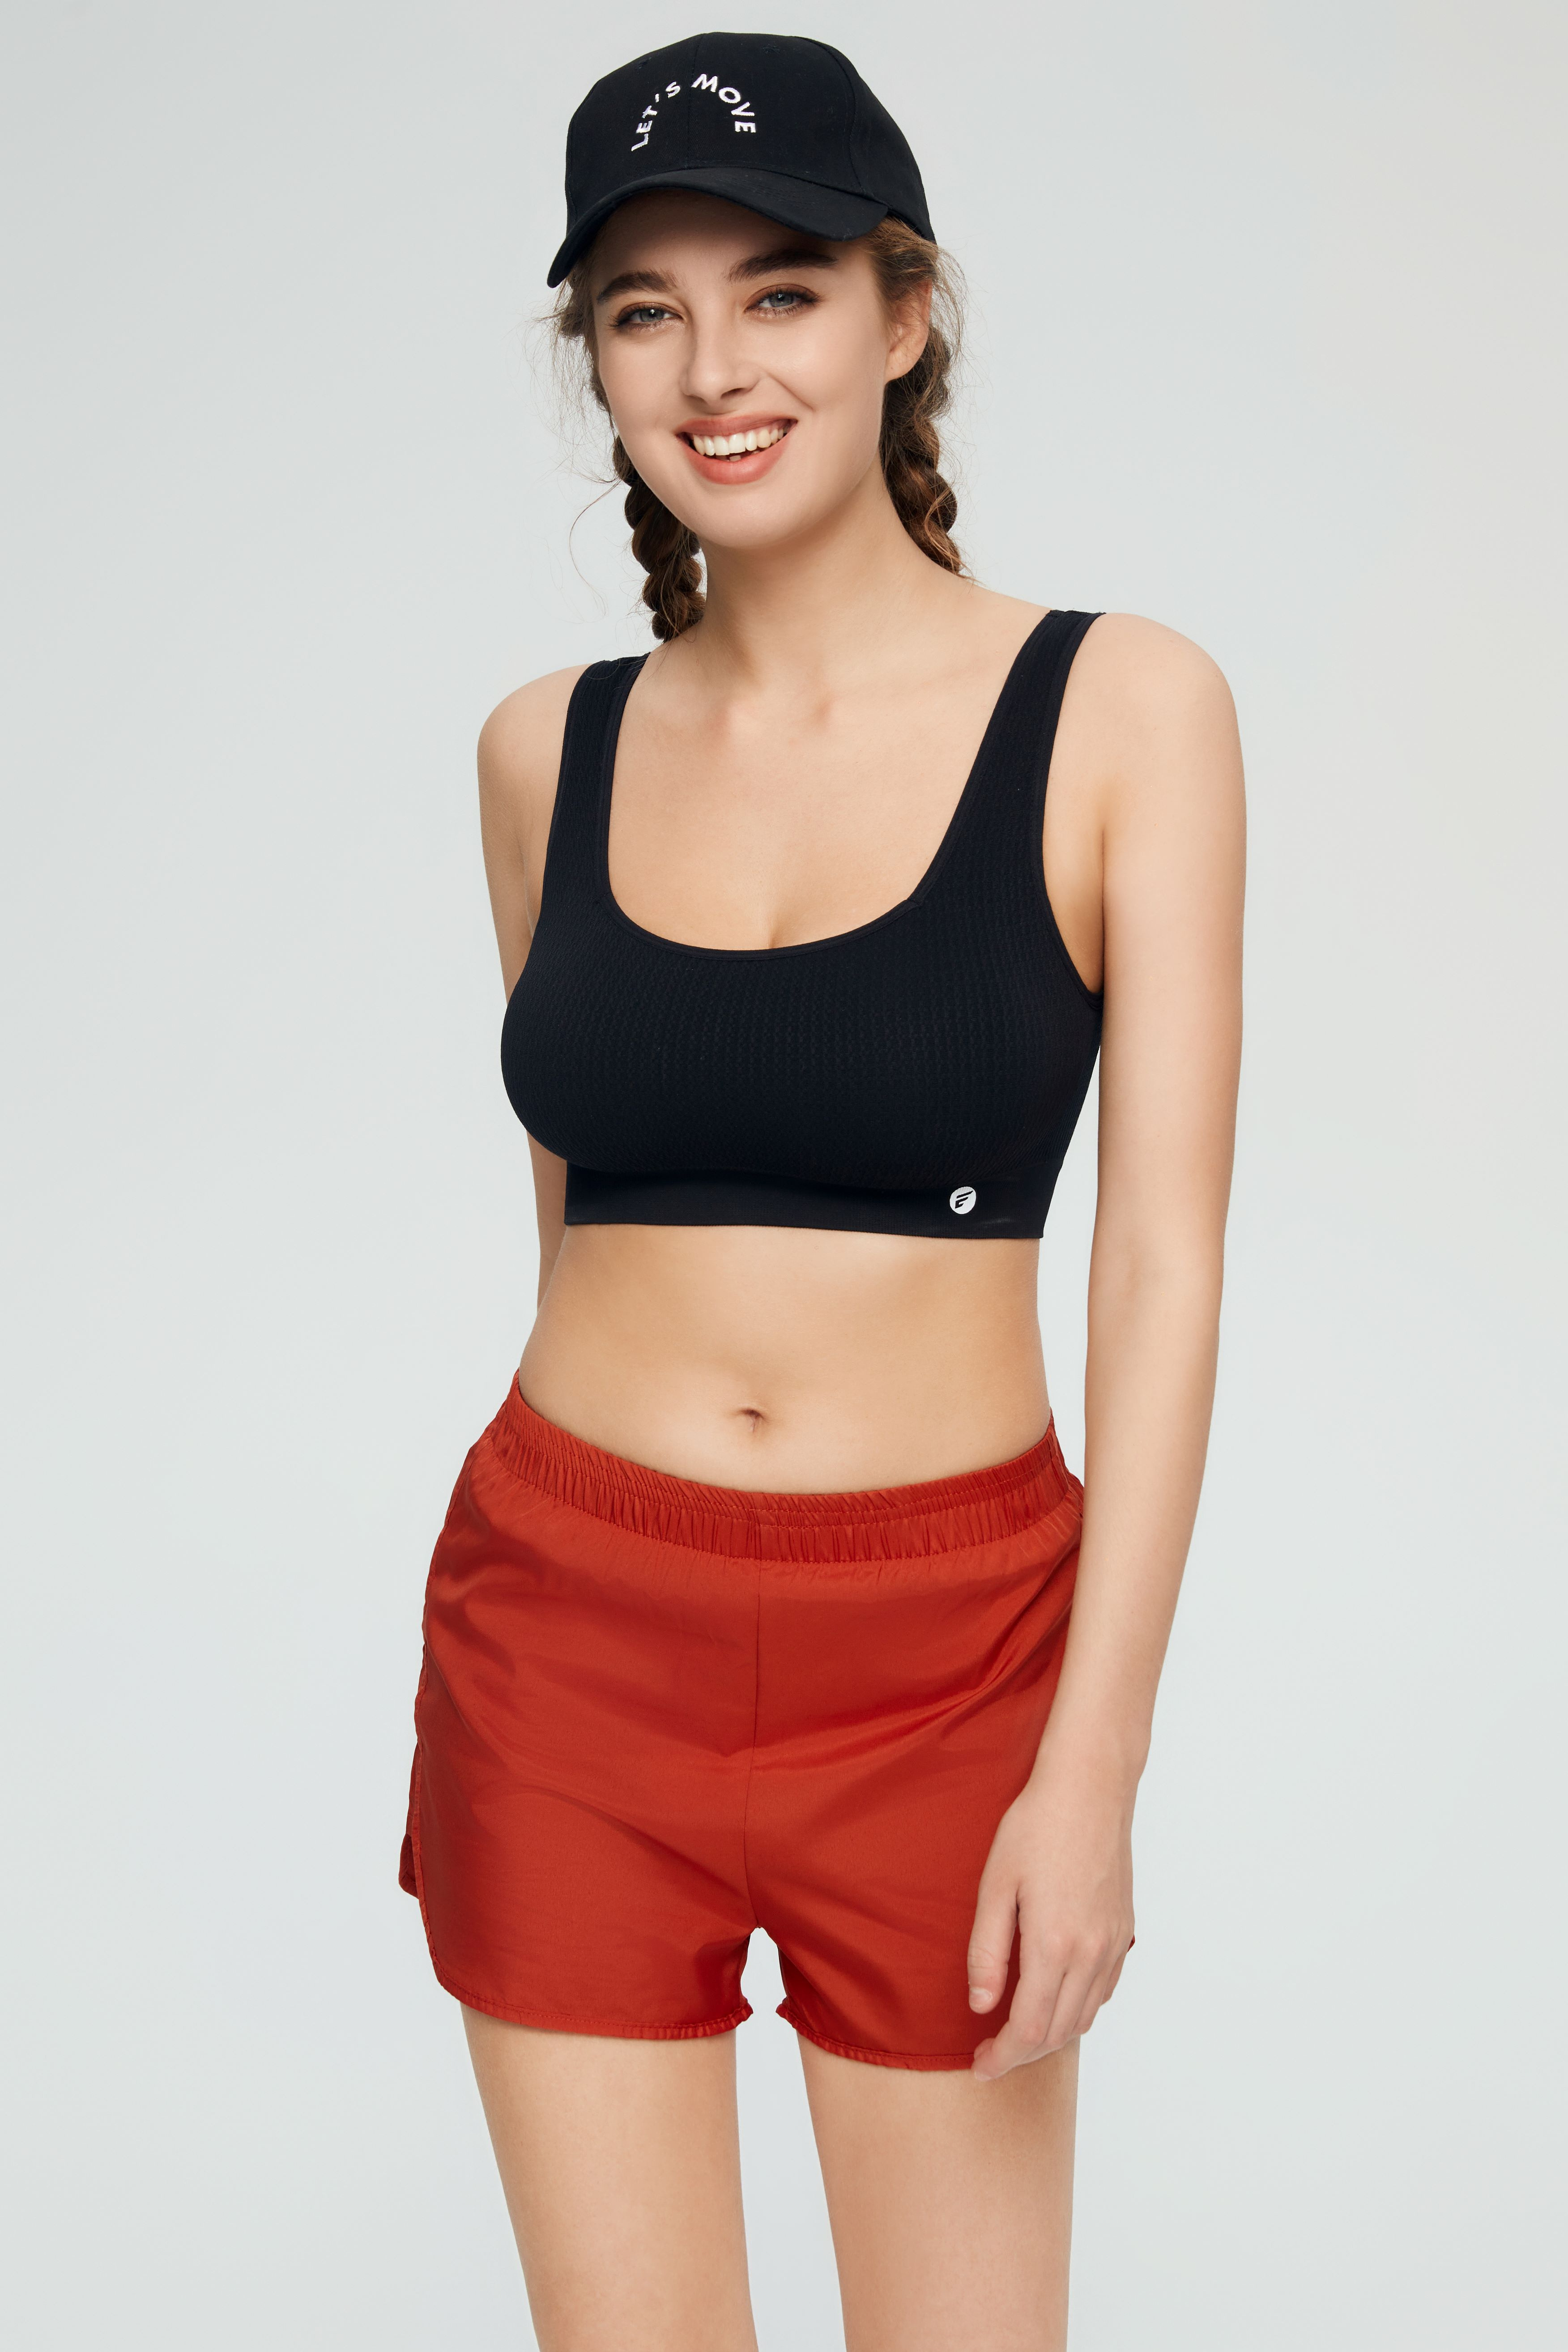 Mineral washed bra cup seamless top - Make a Move Sports Bra